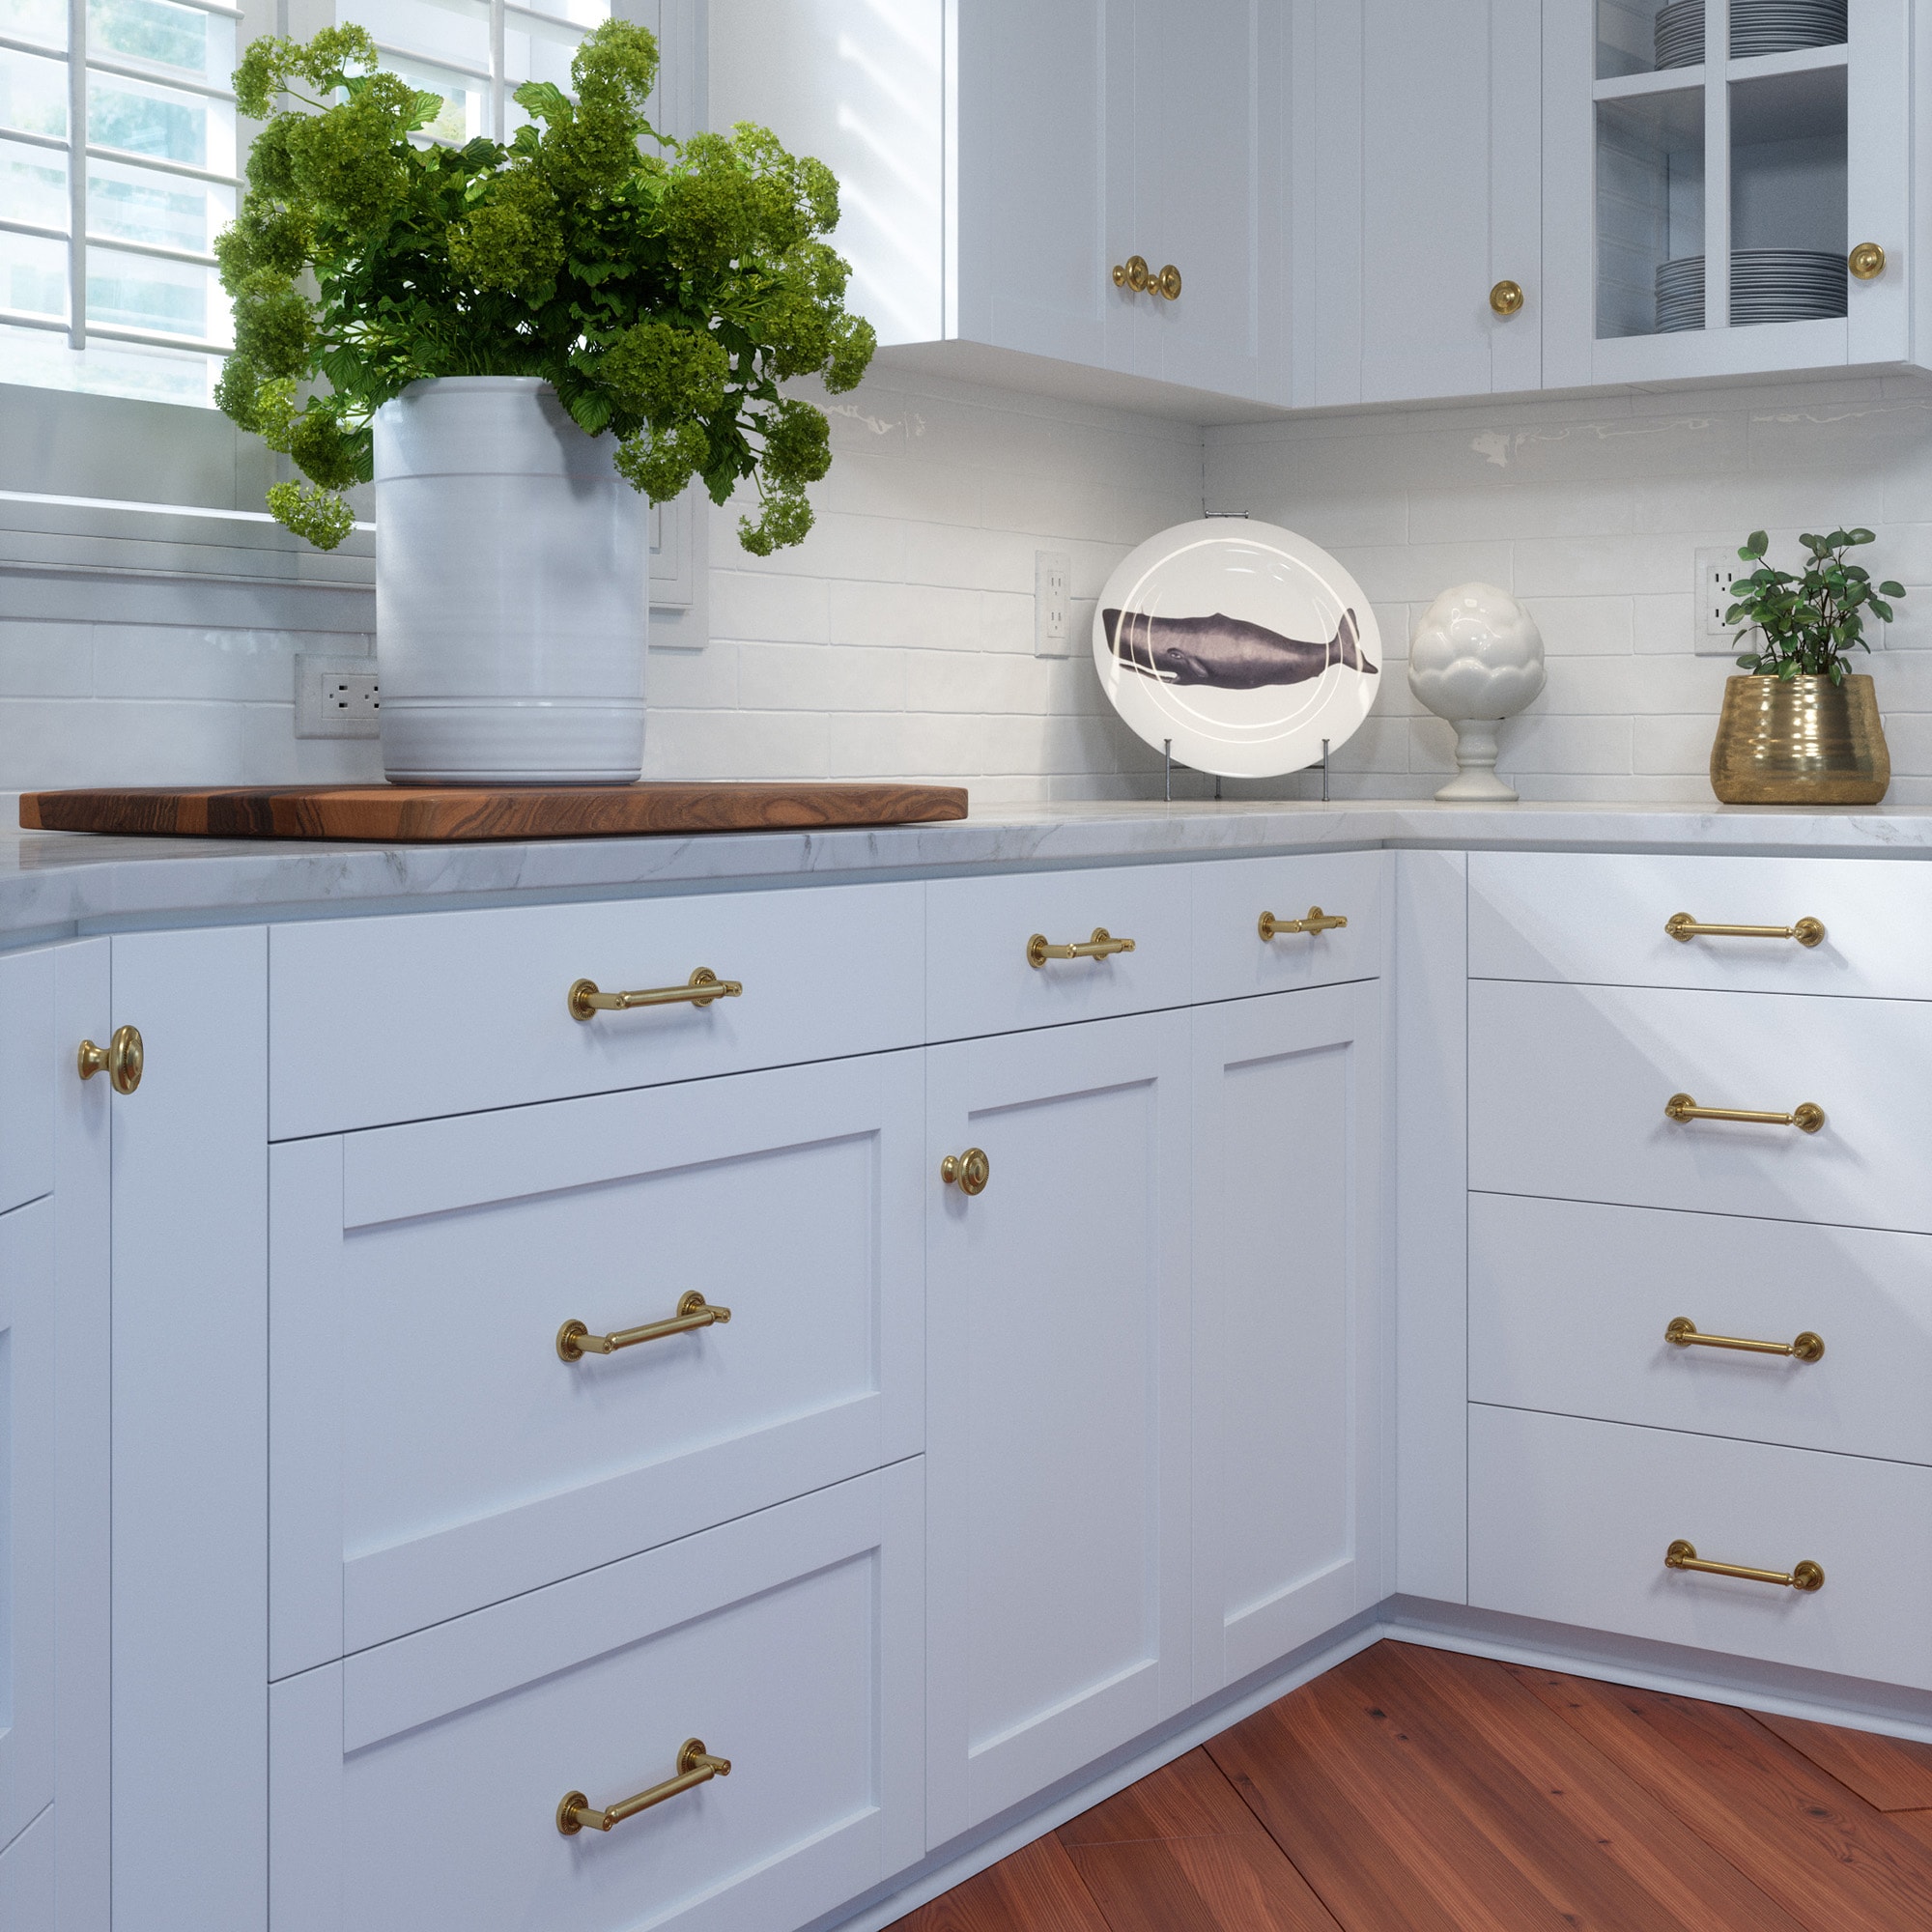 How to Choose the Best Cabinet Hardware from Lowes, Home Depot, or Cabinet Hardware Depot